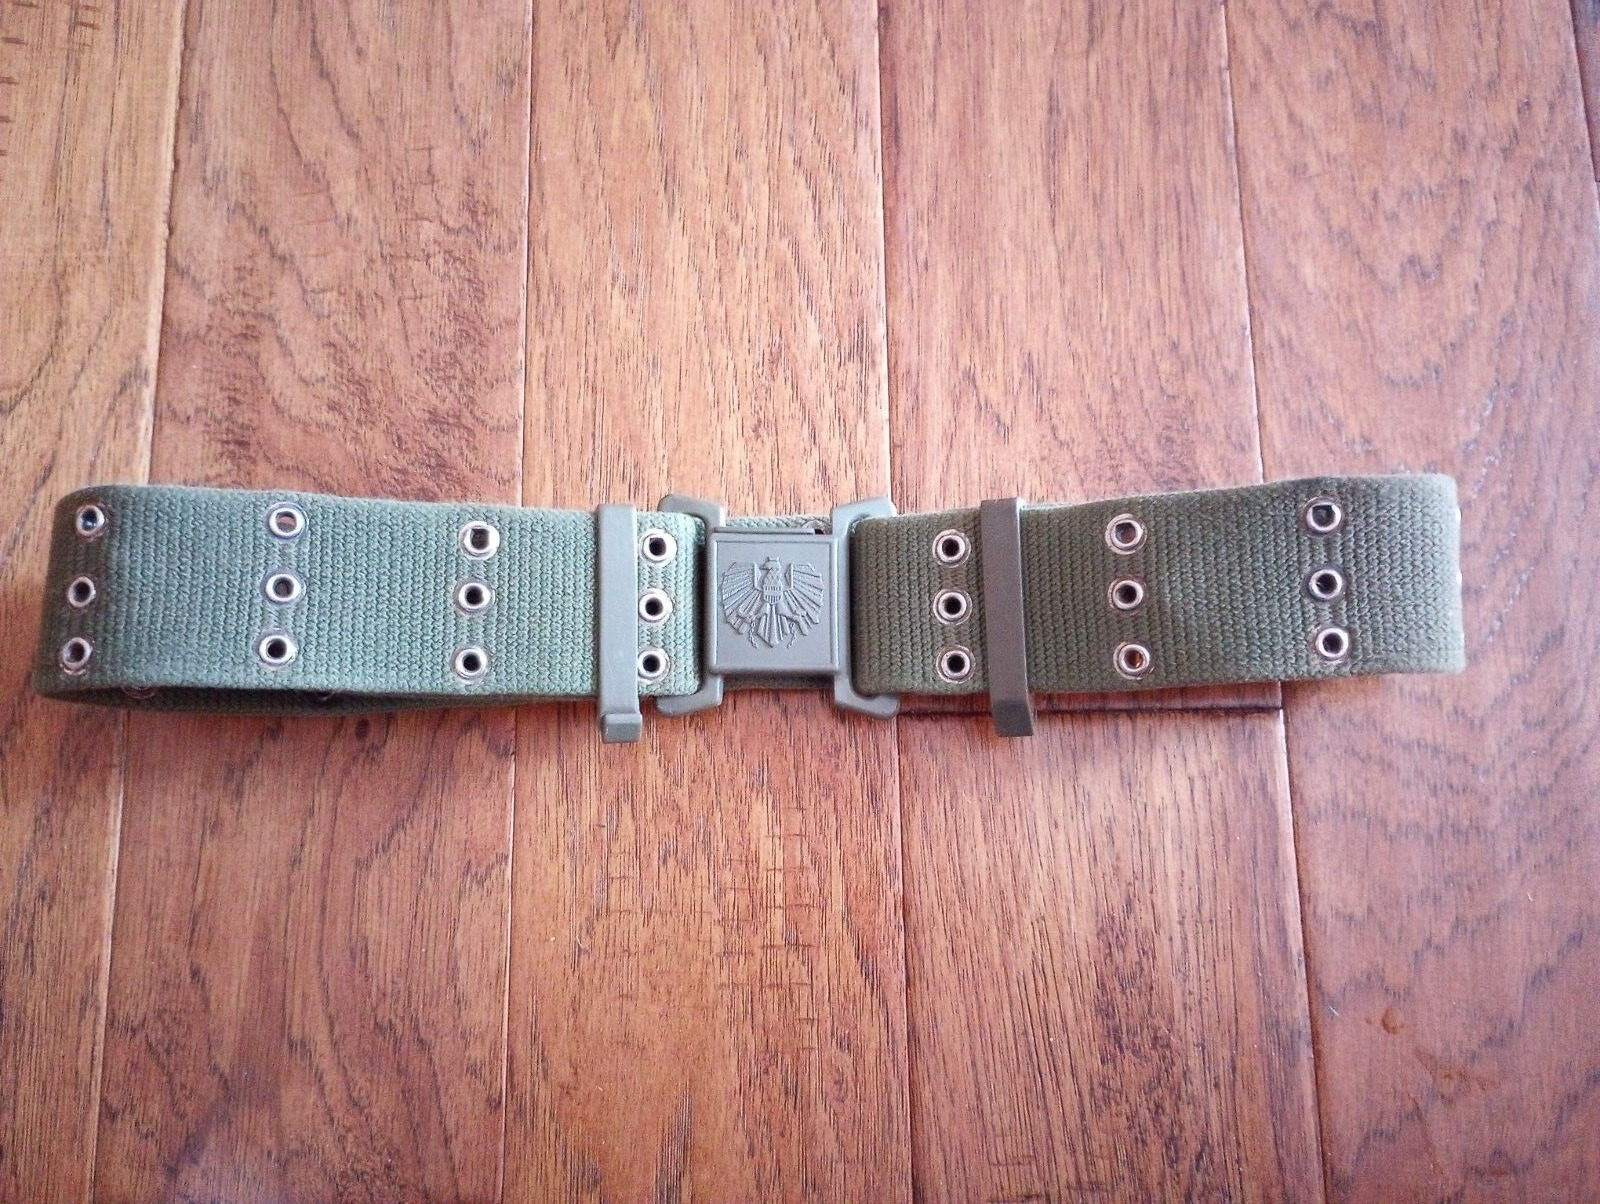 GENUINE AUSTRIAN MILITARY ARMY COMBAT PISTOL BELT AND BUCKLE HEAVY WEB MATERIAL